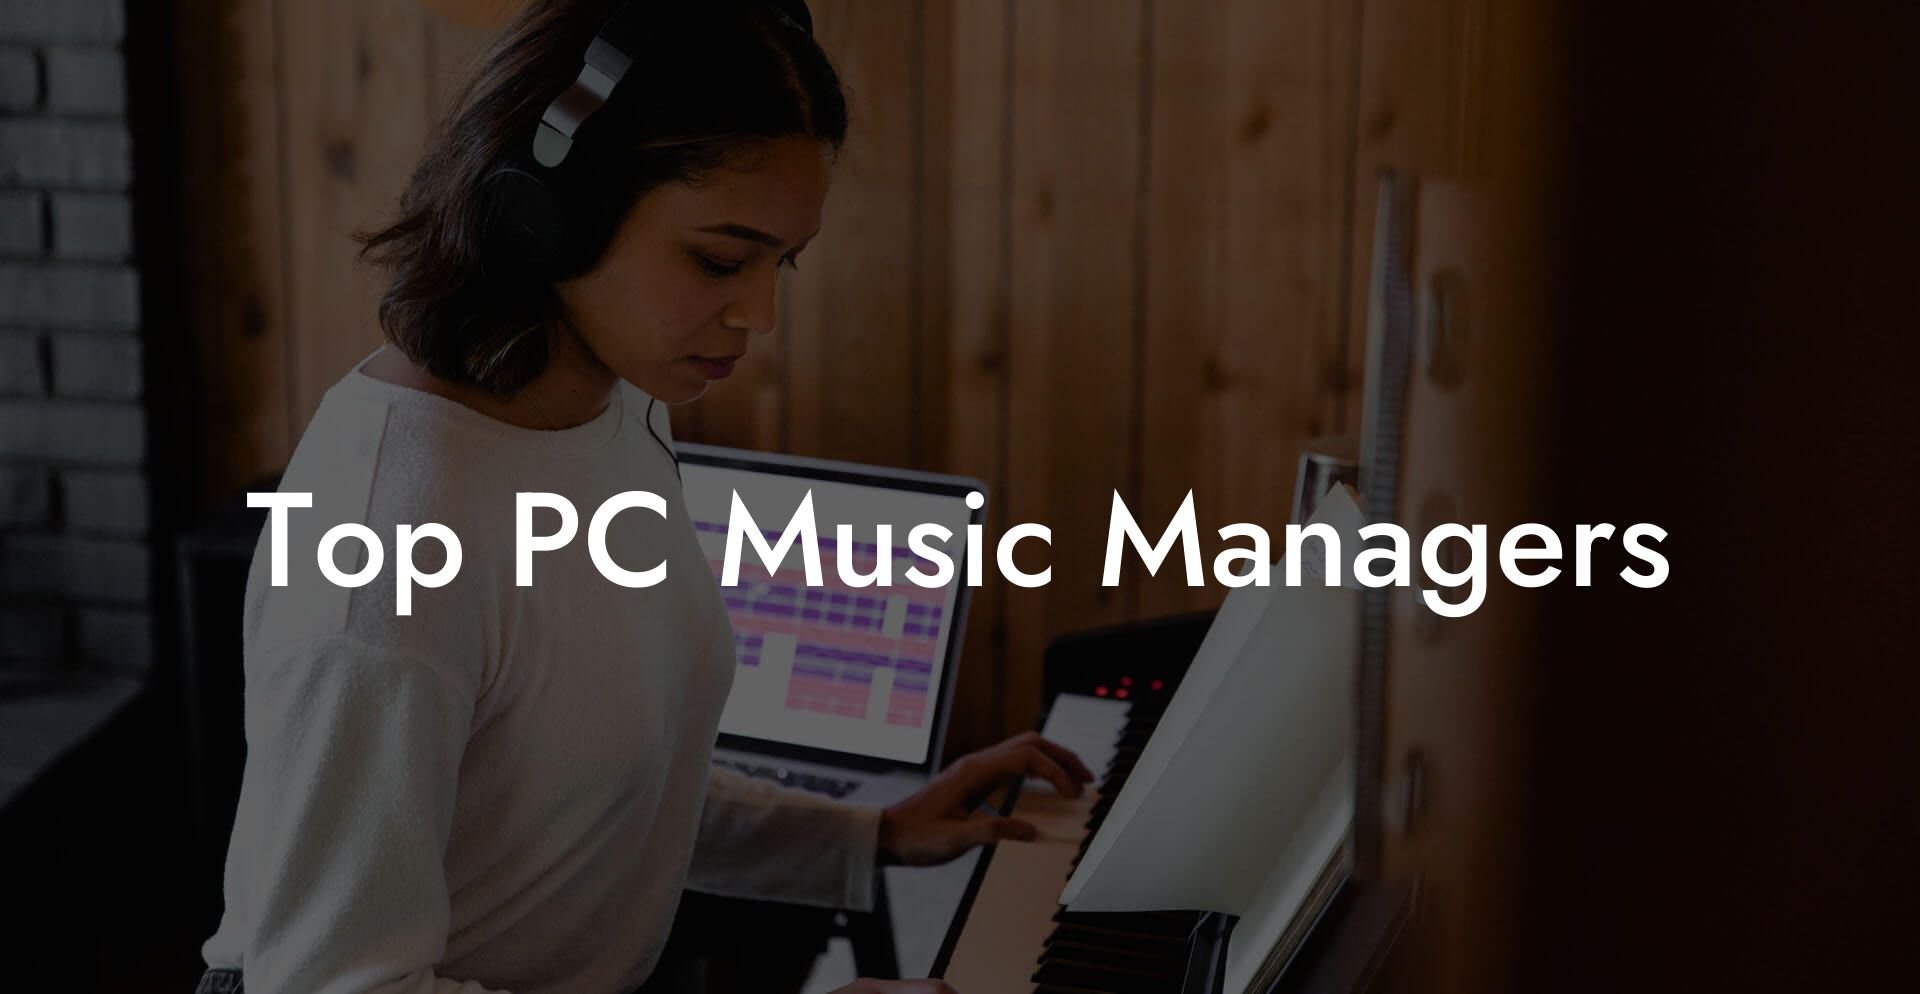 Top PC Music Managers